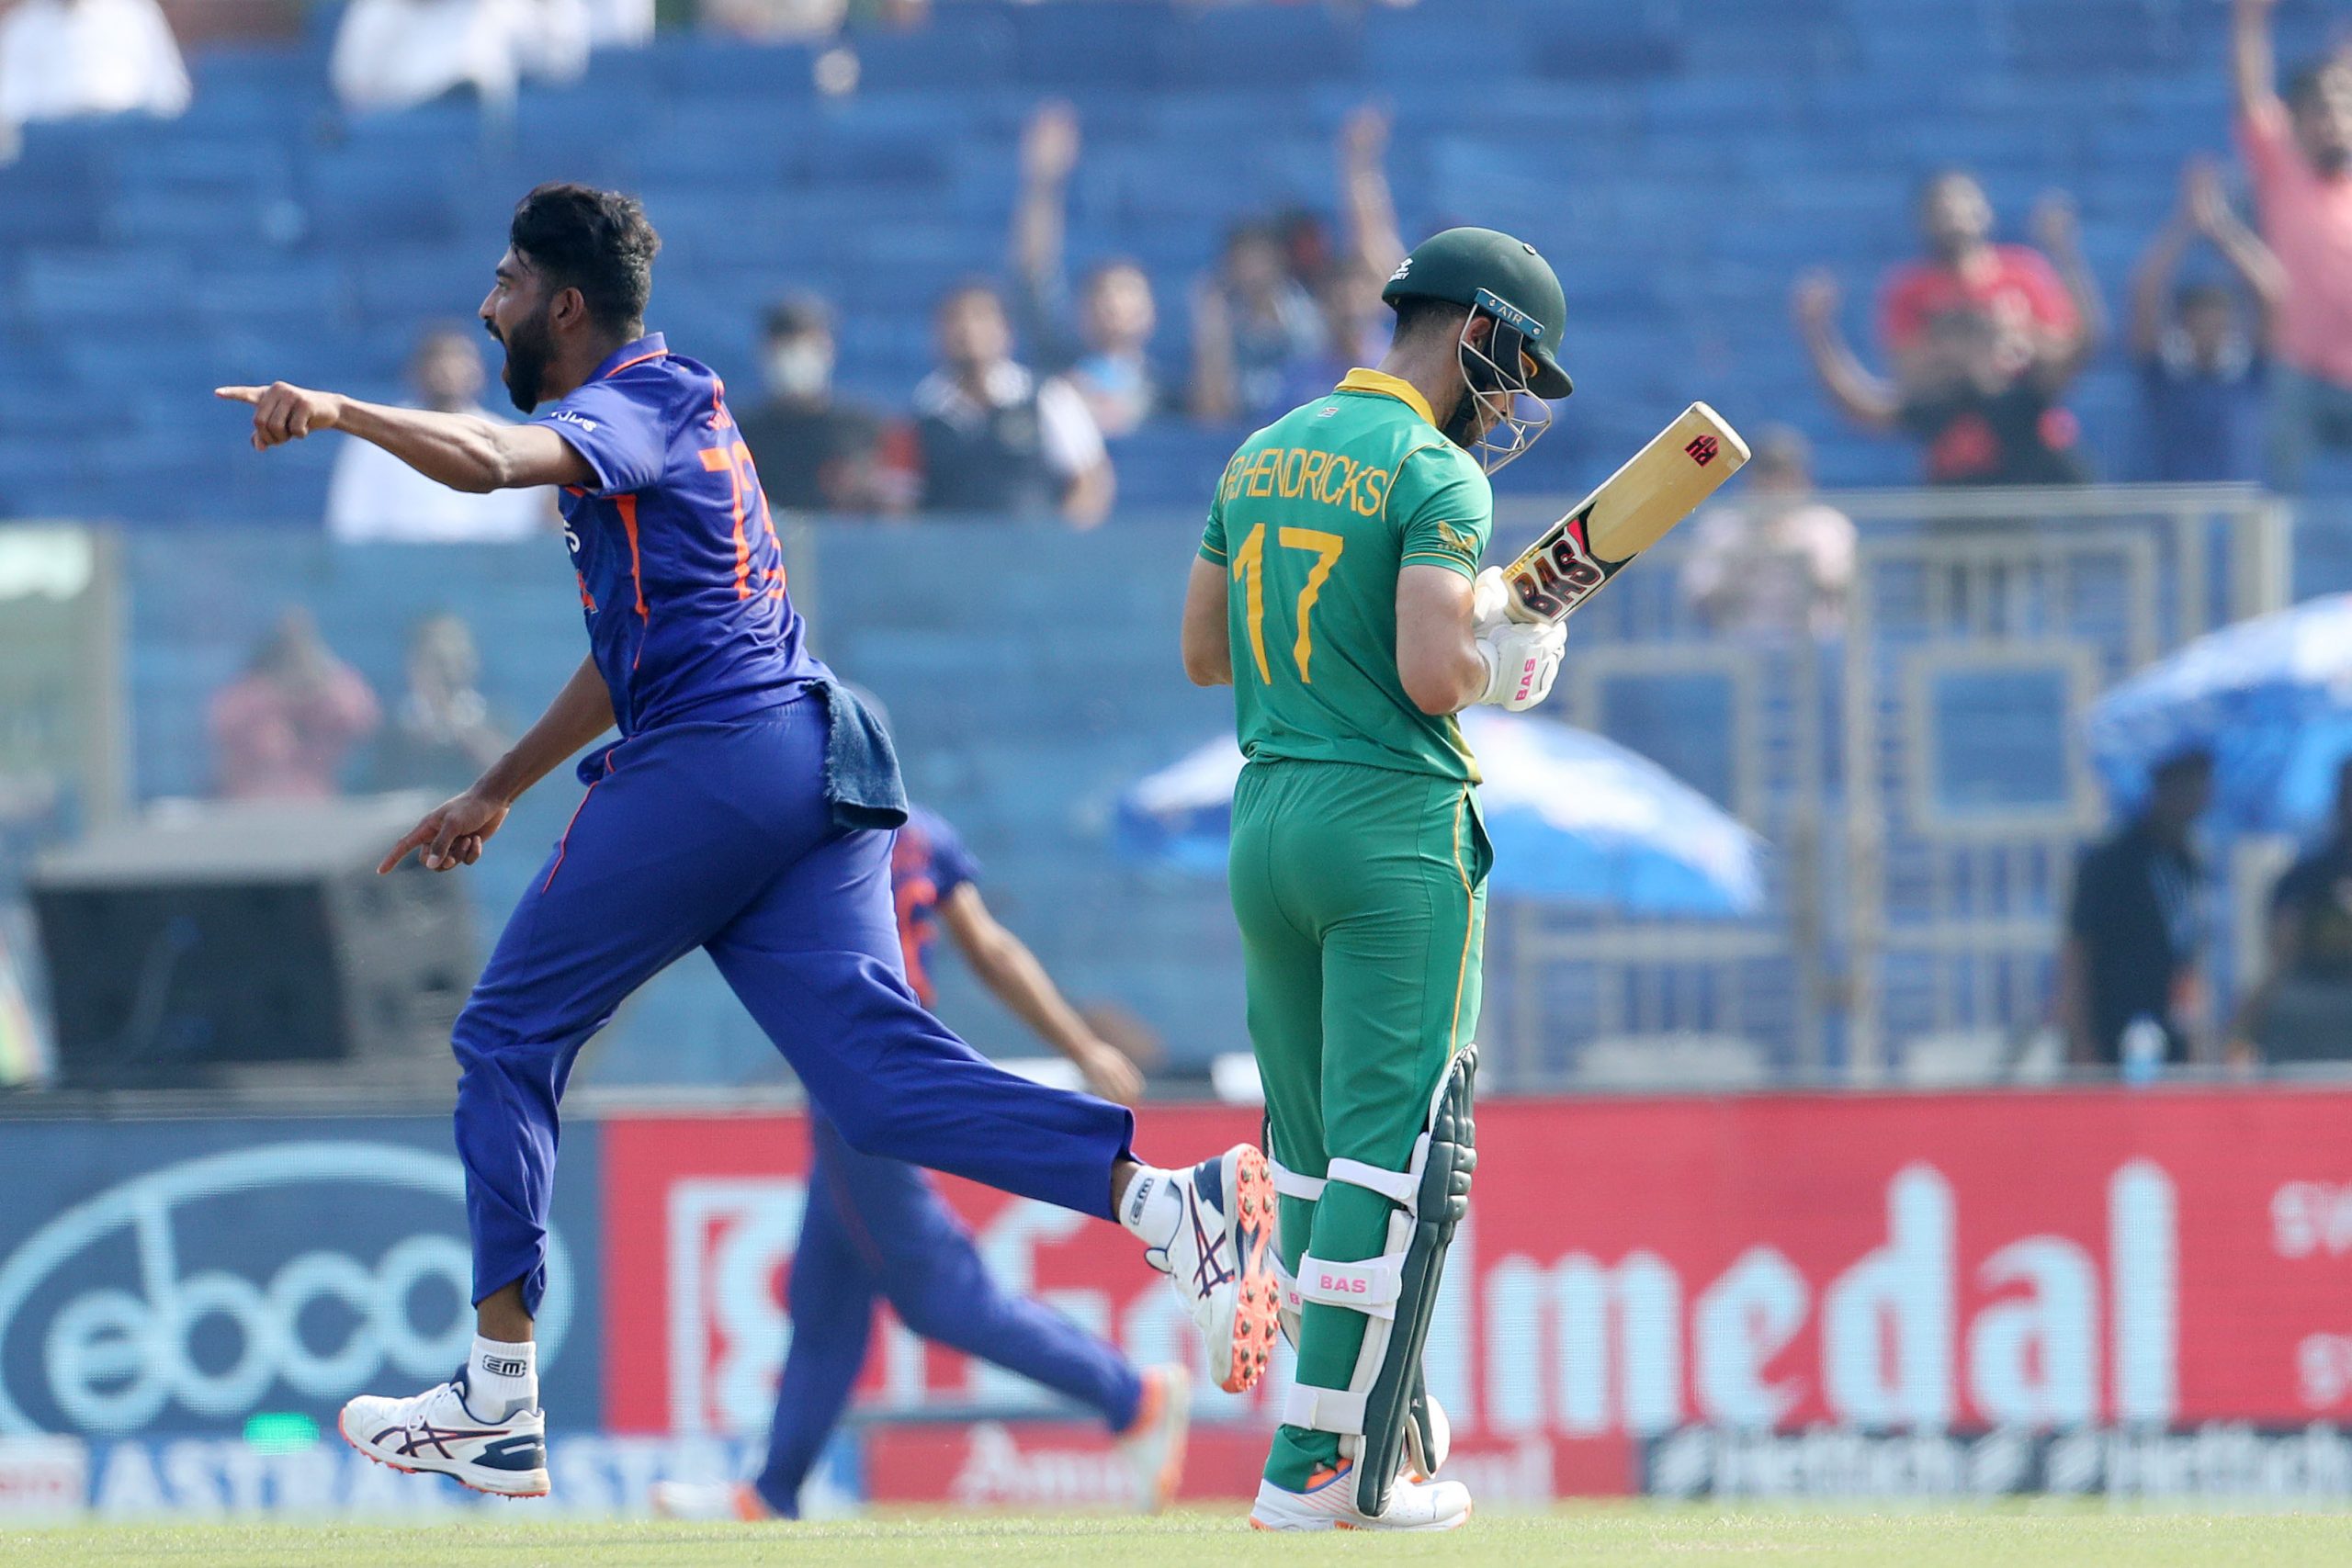 South Africa puts up 99, their lowest score against India in an ODI